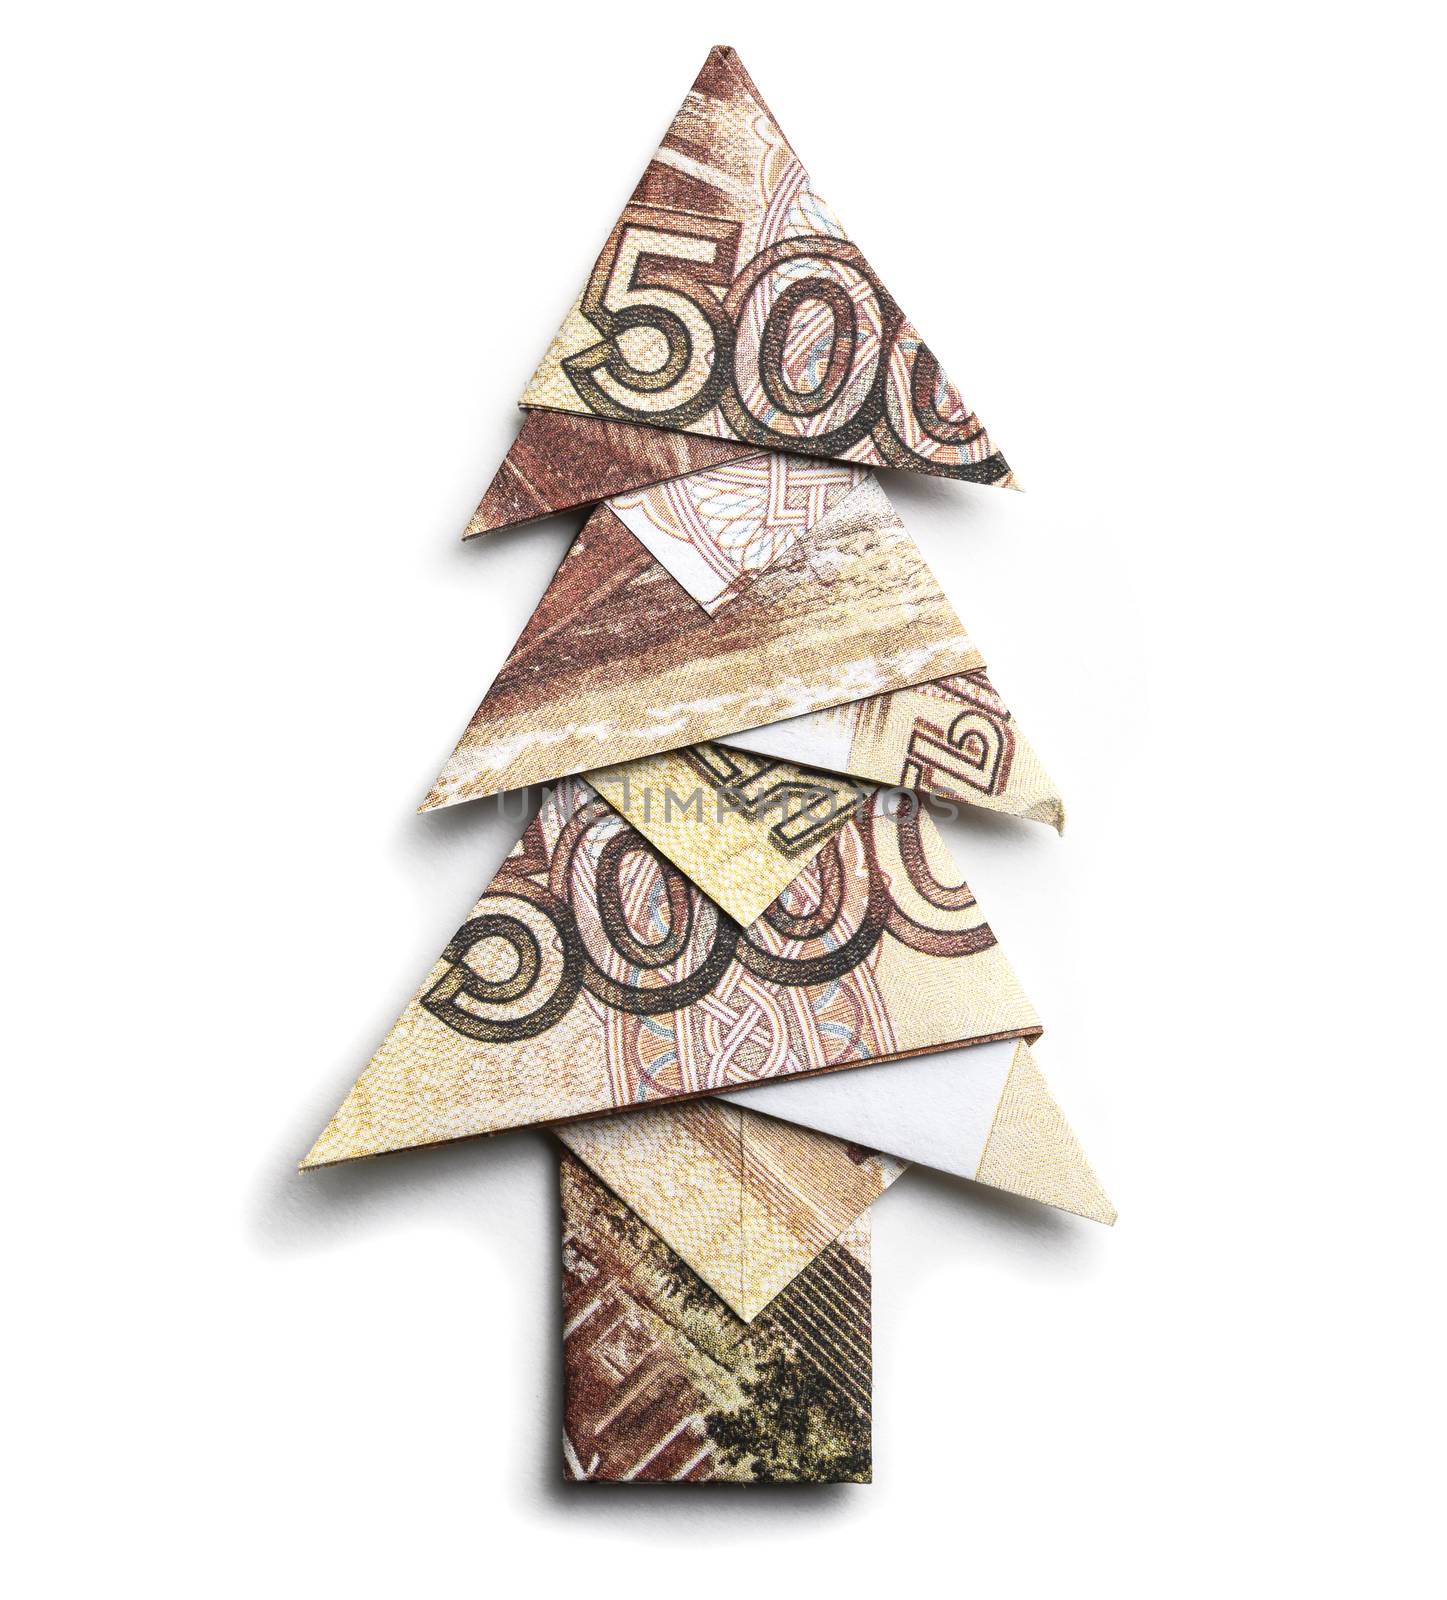 5000 Russian rubles in the form of a Christmas tree on a white background by butenkow